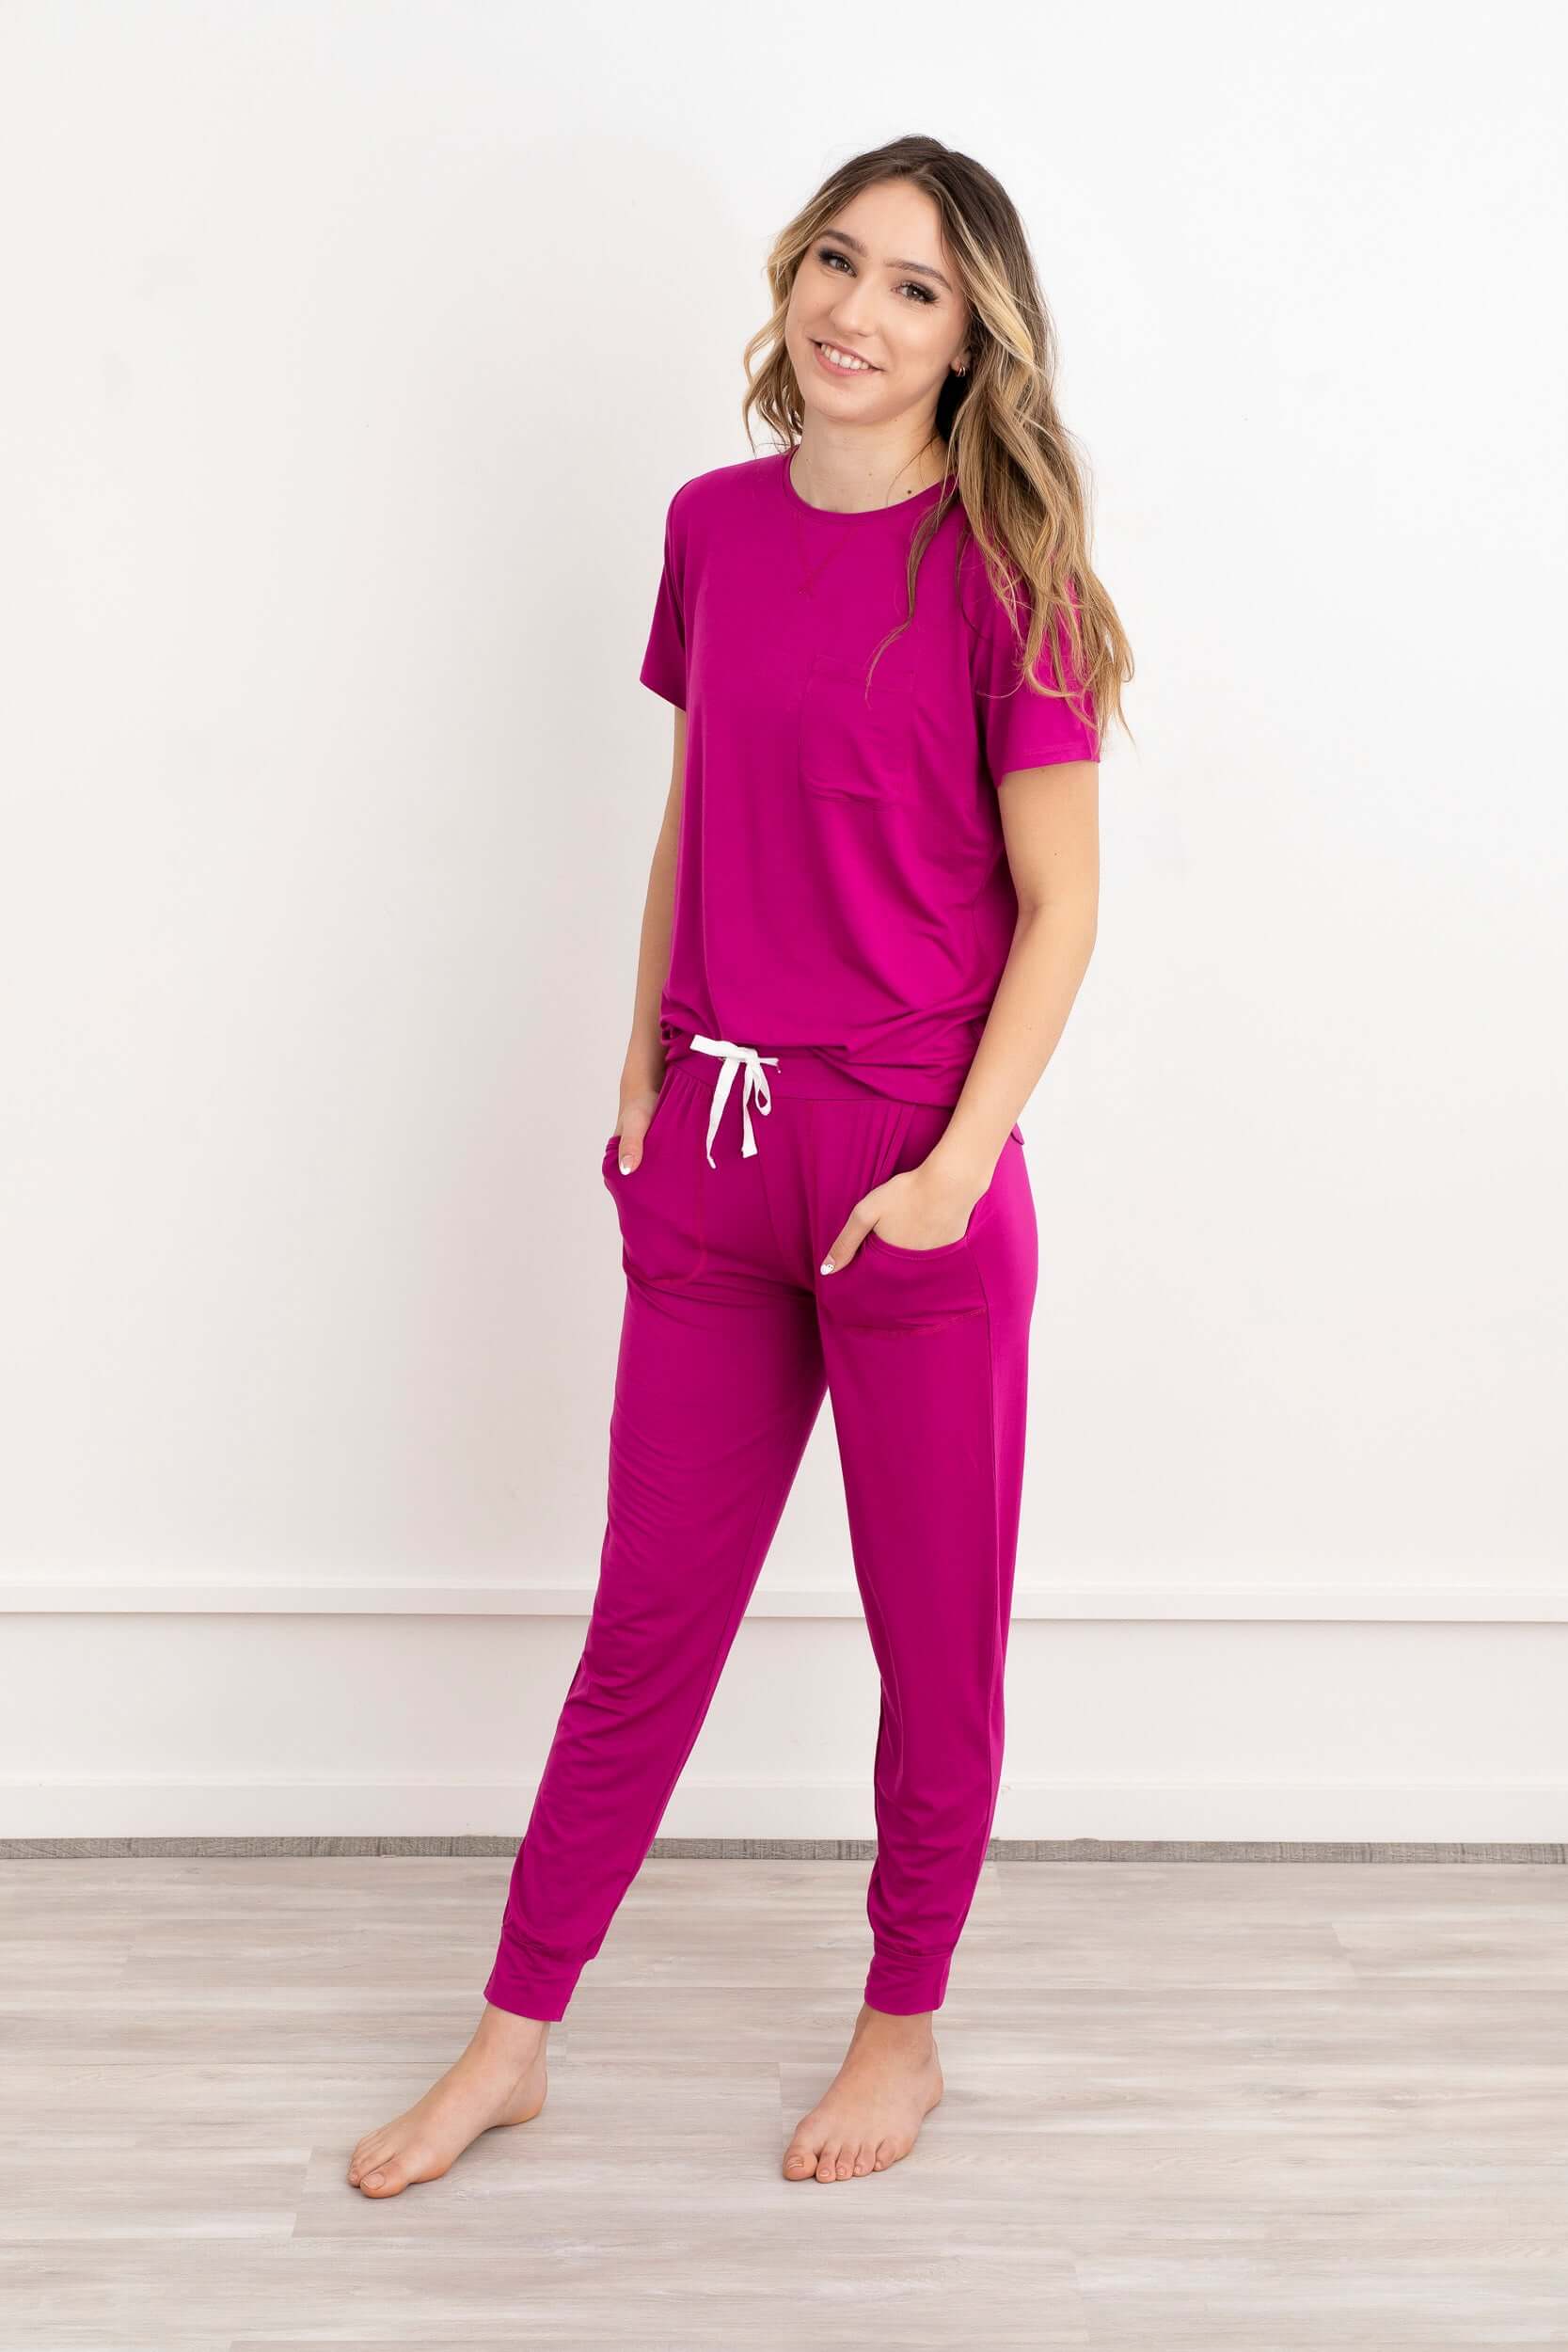 In this photo, a girl exudes casual elegance in our Rosy Pink Modal Short Sleeve and Pants Pajama Set. The soft, breathable fabric drapes gracefully, offering both comfort and style. The cool rosy hue adds a touch of sophistication to her relaxed ensemble